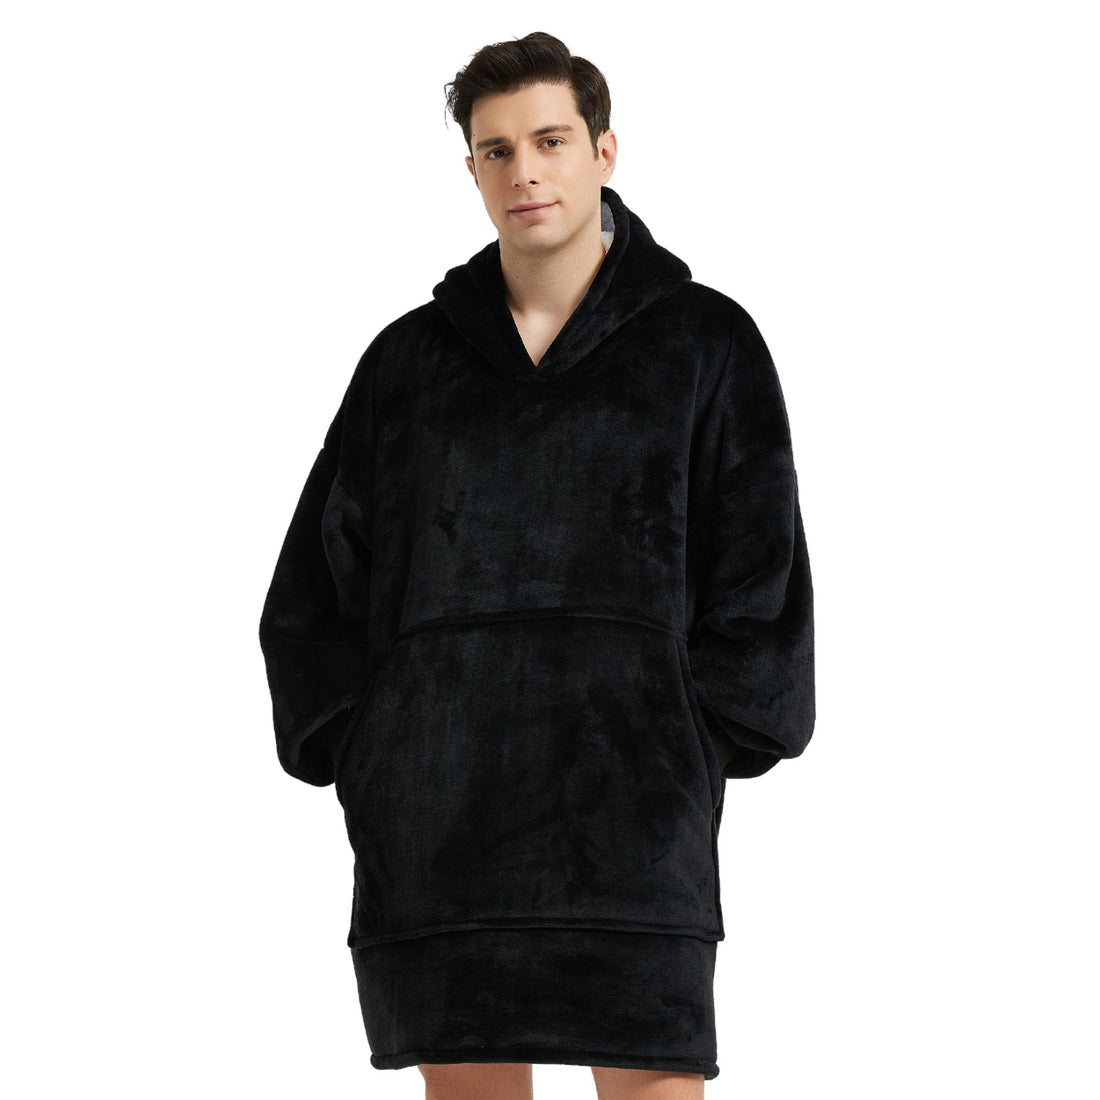 Pull Plaid Homme Noir Sweat Polaire Géant flanelle microfibre polyester The Oversized Hoodie